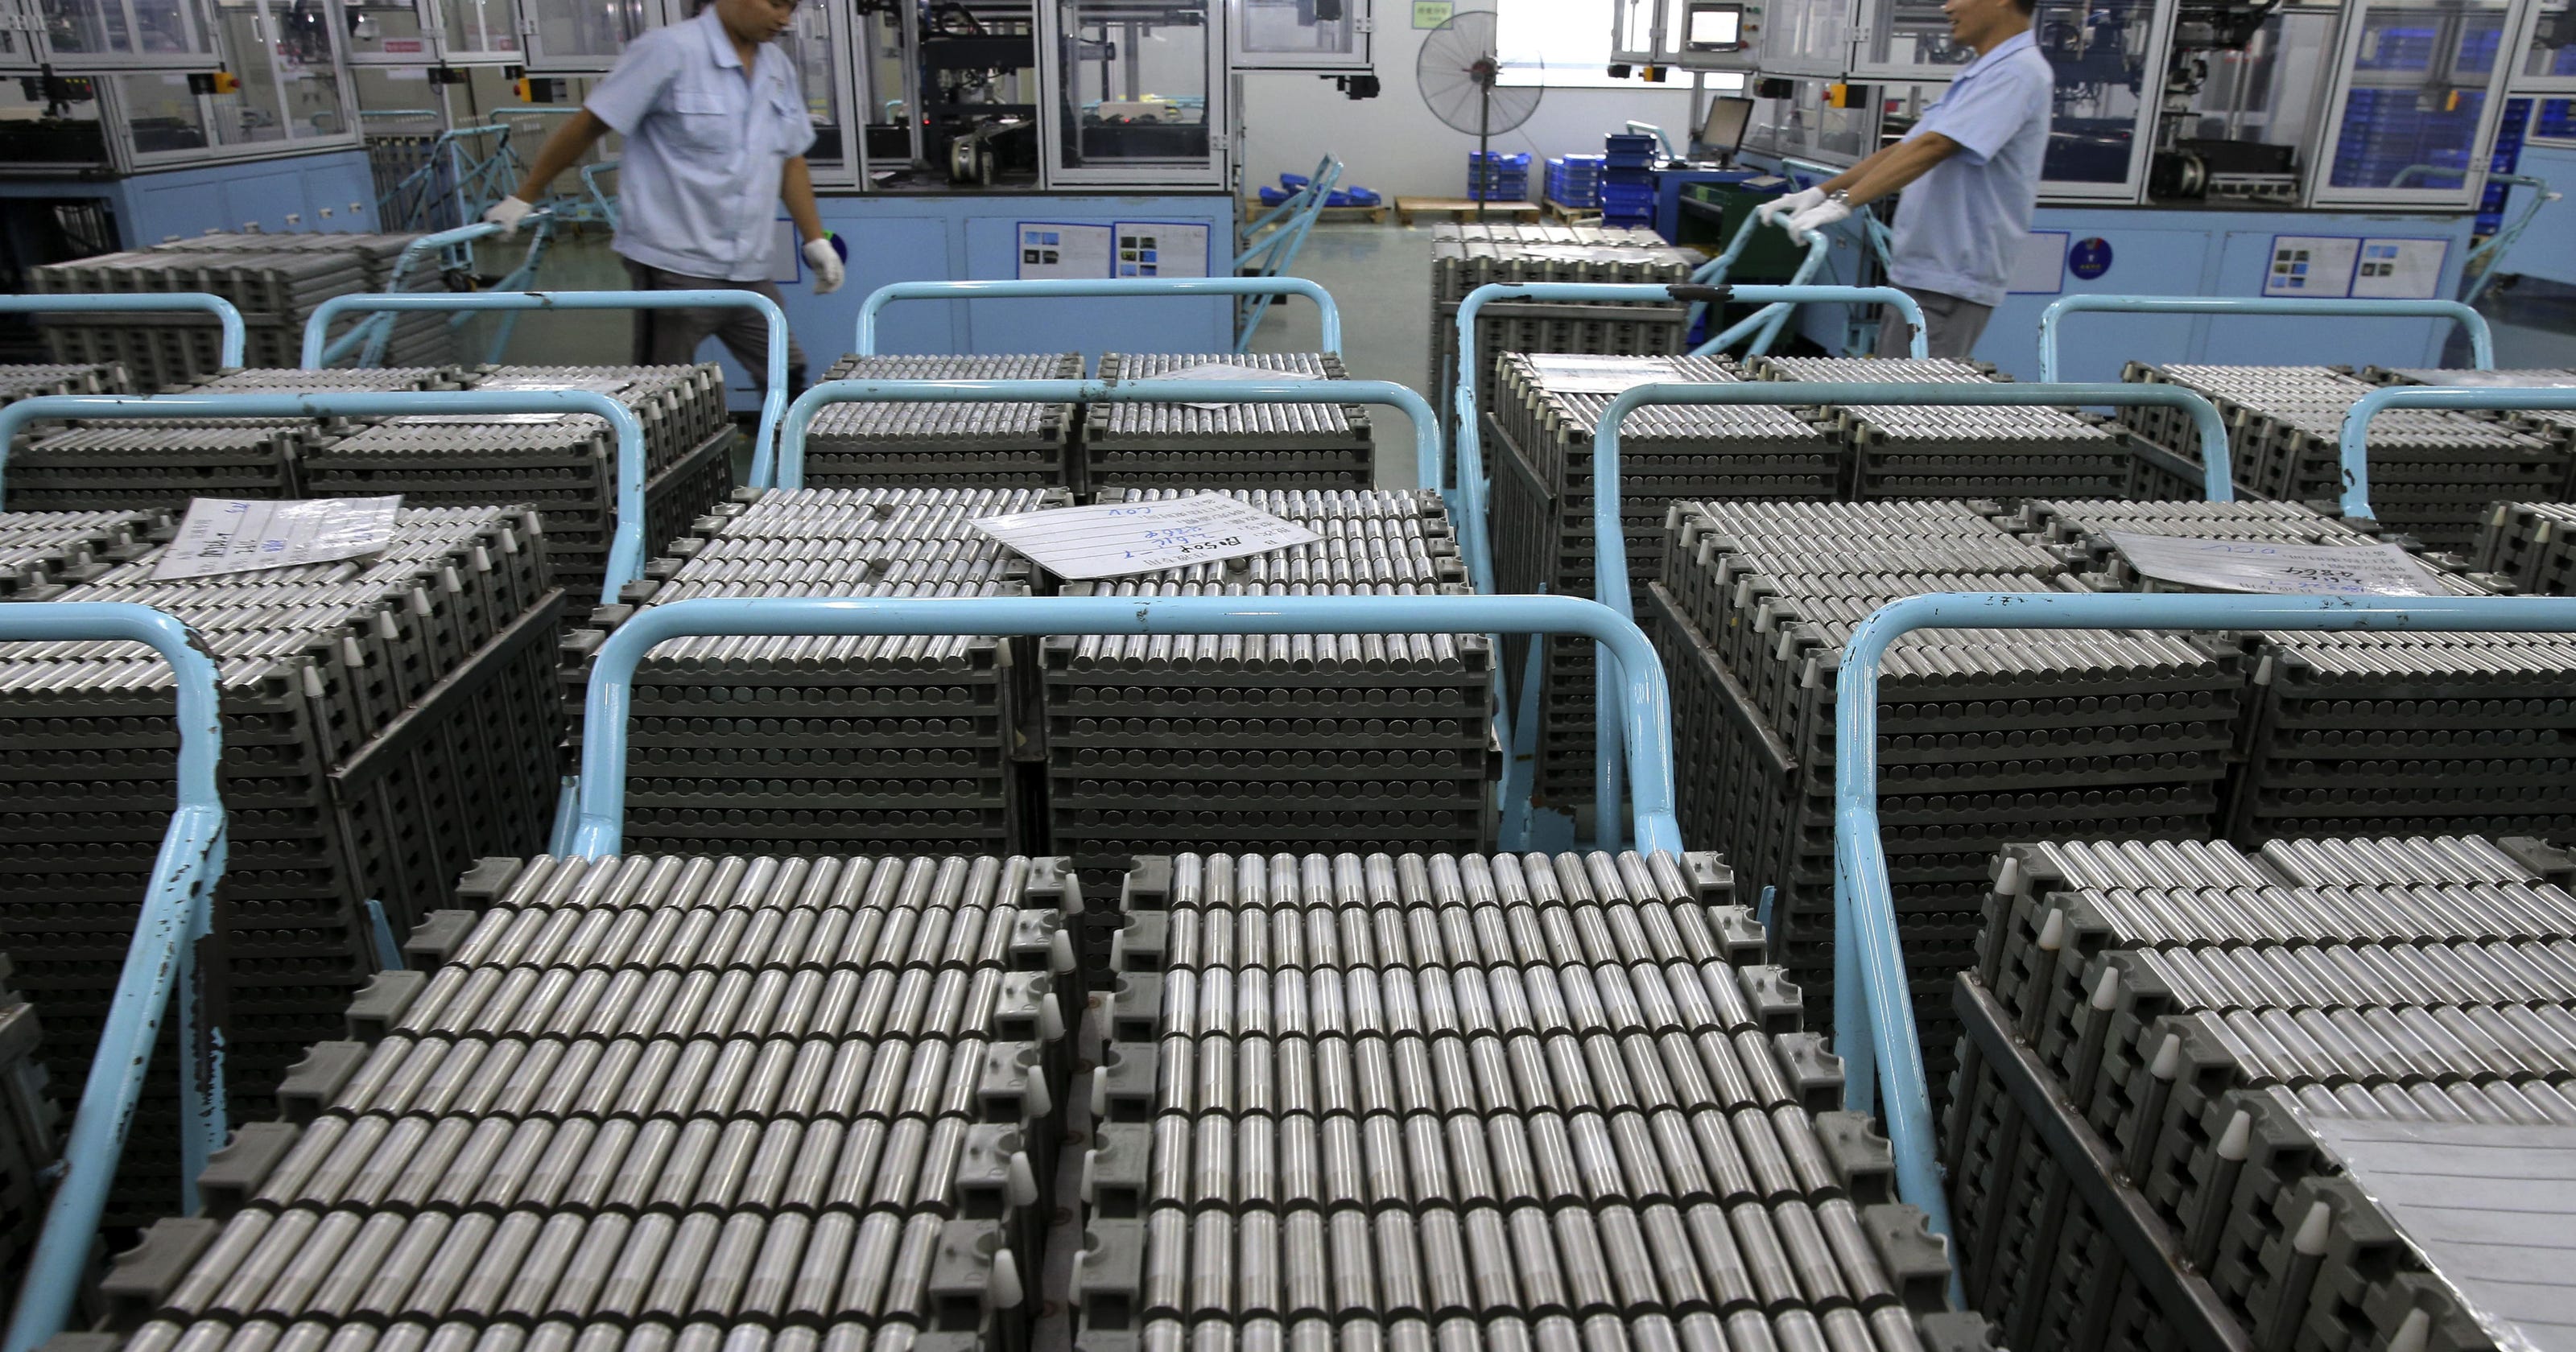 People working on recycling lithium batteries